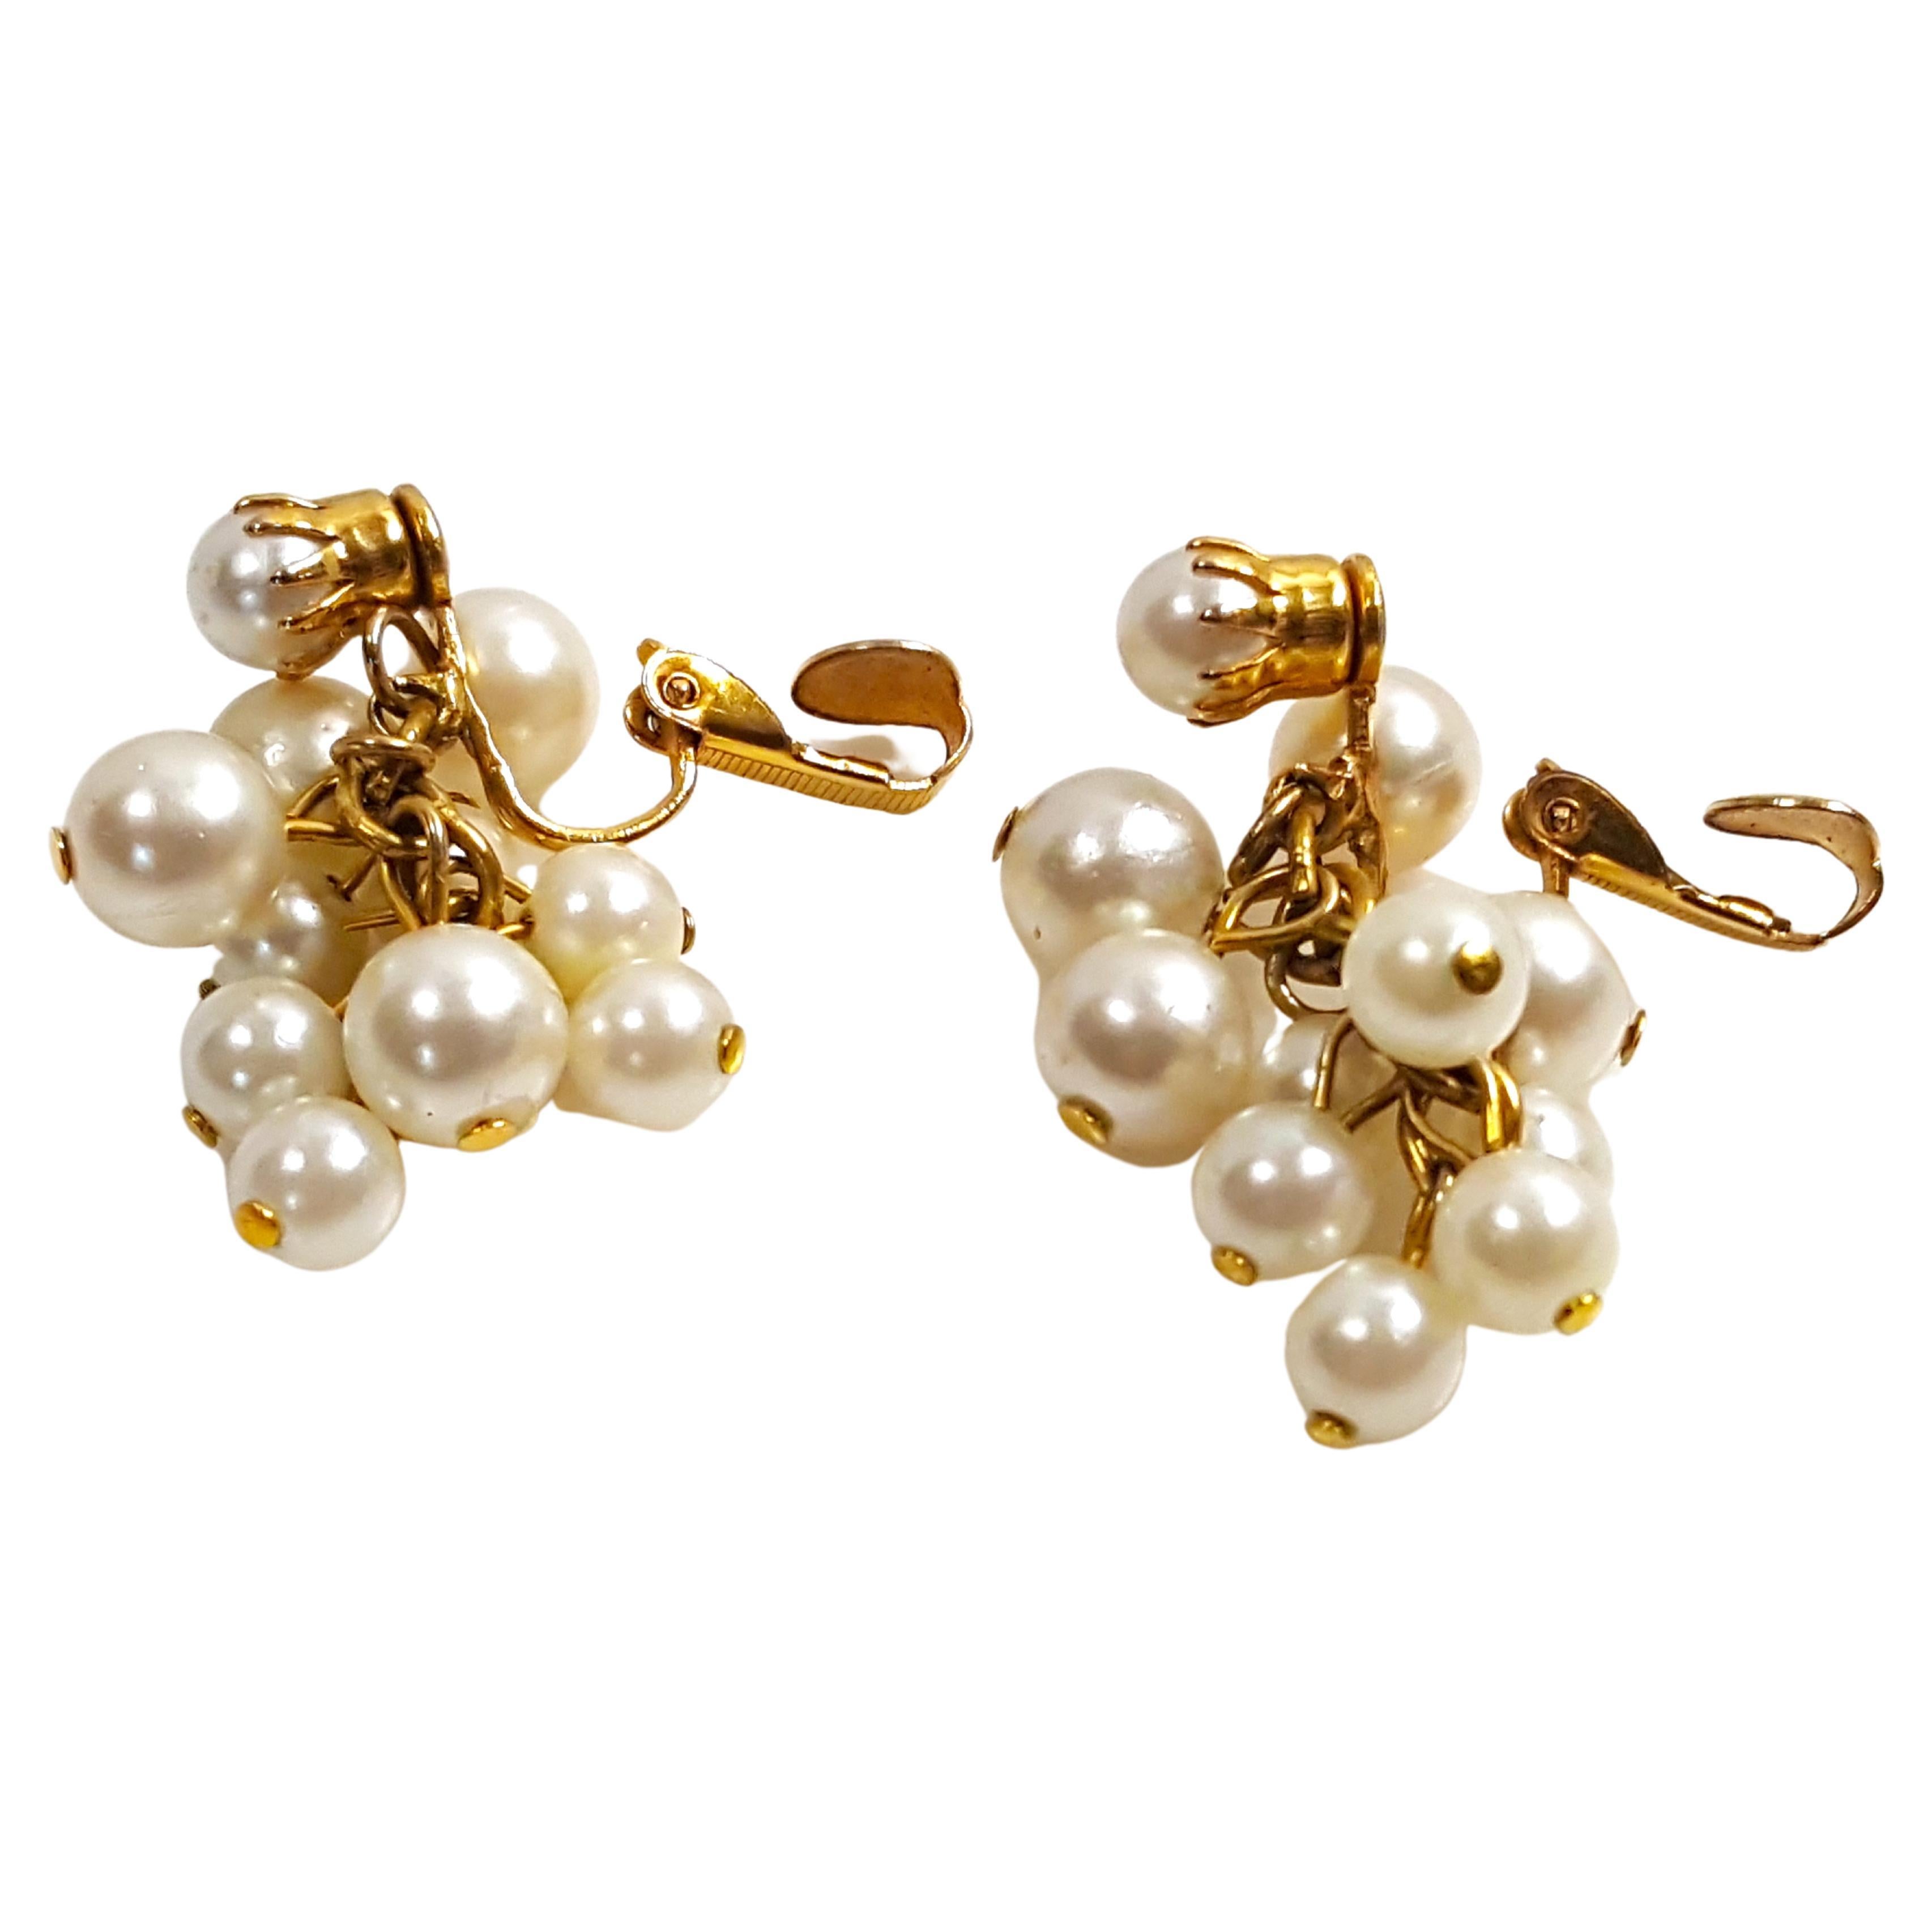 Miriam Haskell's first designer since 1926 Frank Hess created in a Baroque style these handcrafted cluster-cascade-dangle earrings that feature coated-glass ecru round faux-pearls whose yellow Russian-gilt brass findings are mixed with 24 karat